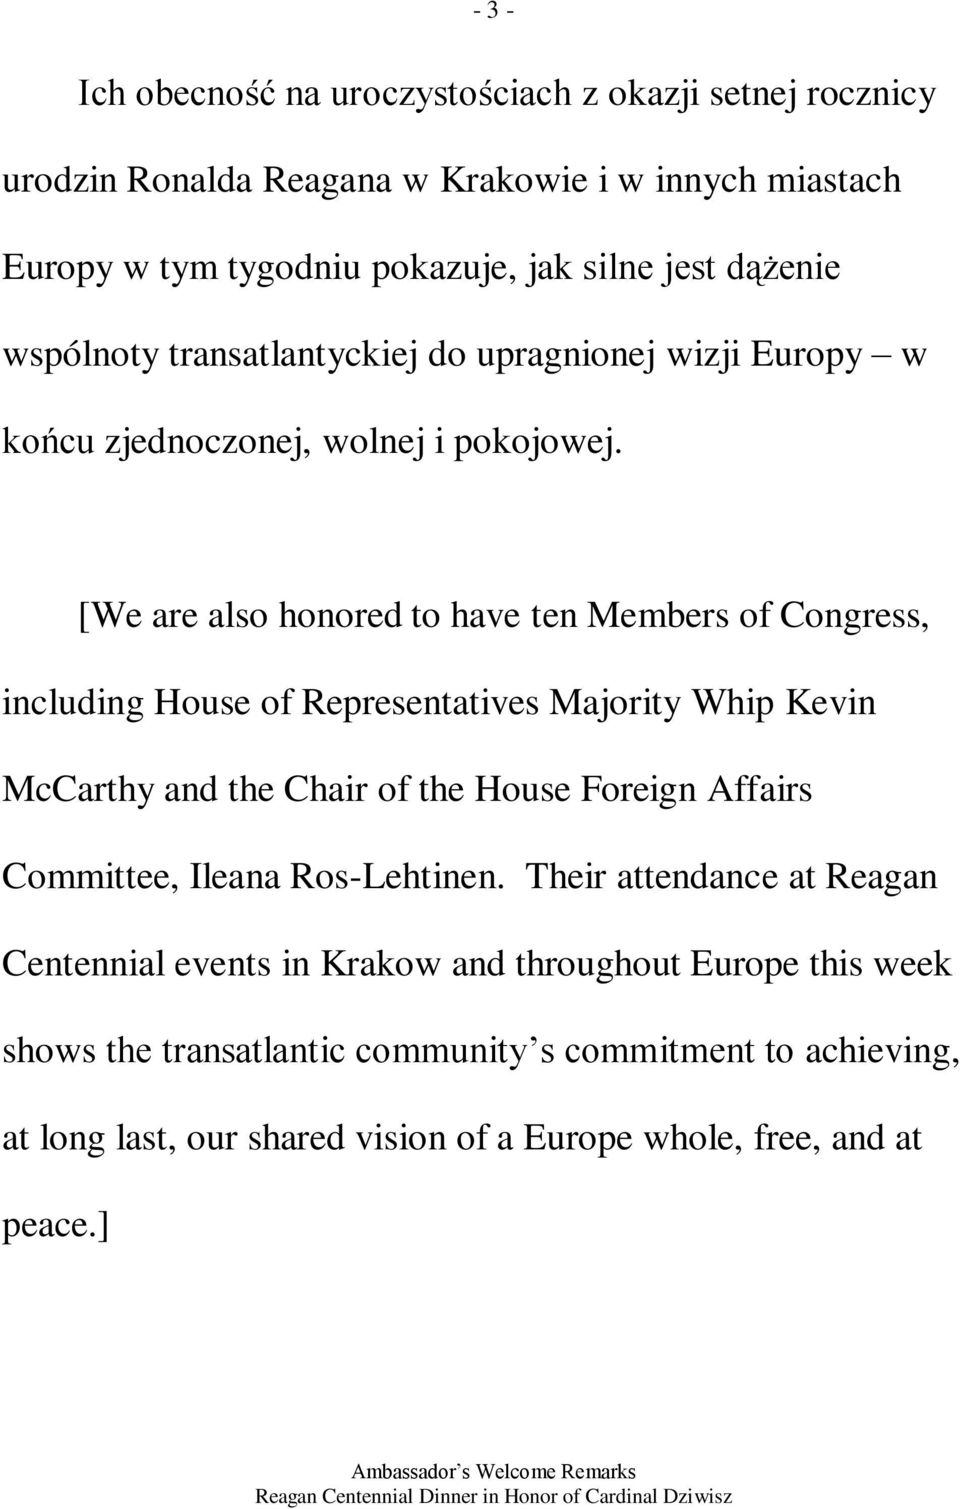 [We are also honored to have ten Members of Congress, including House of Representatives Majority Whip Kevin McCarthy and the Chair of the House Foreign Affairs